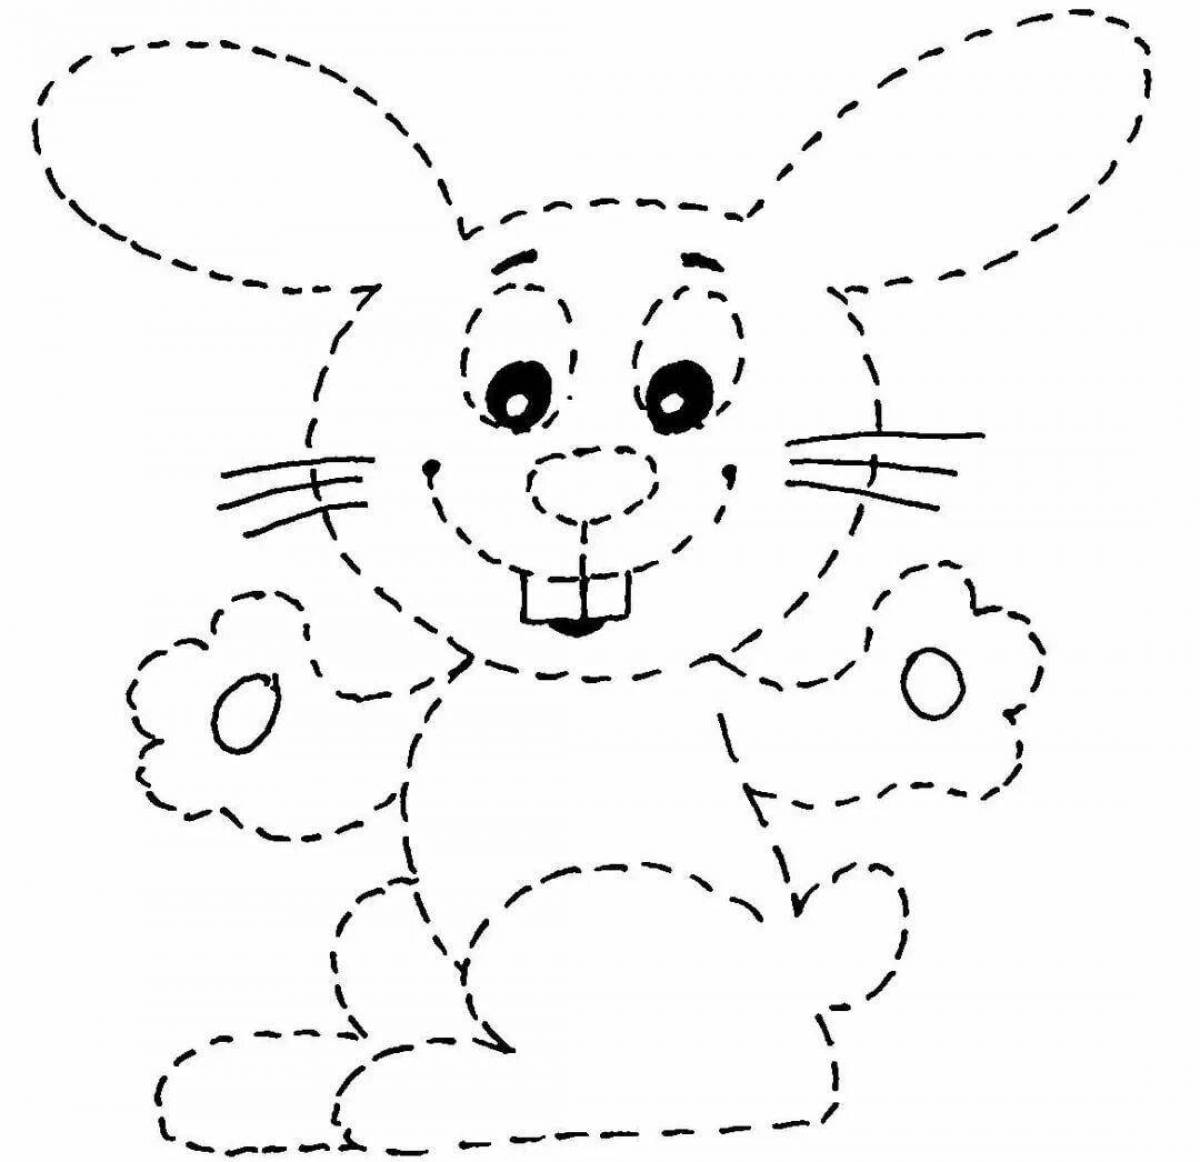 Entertaining dotted line coloring for kids